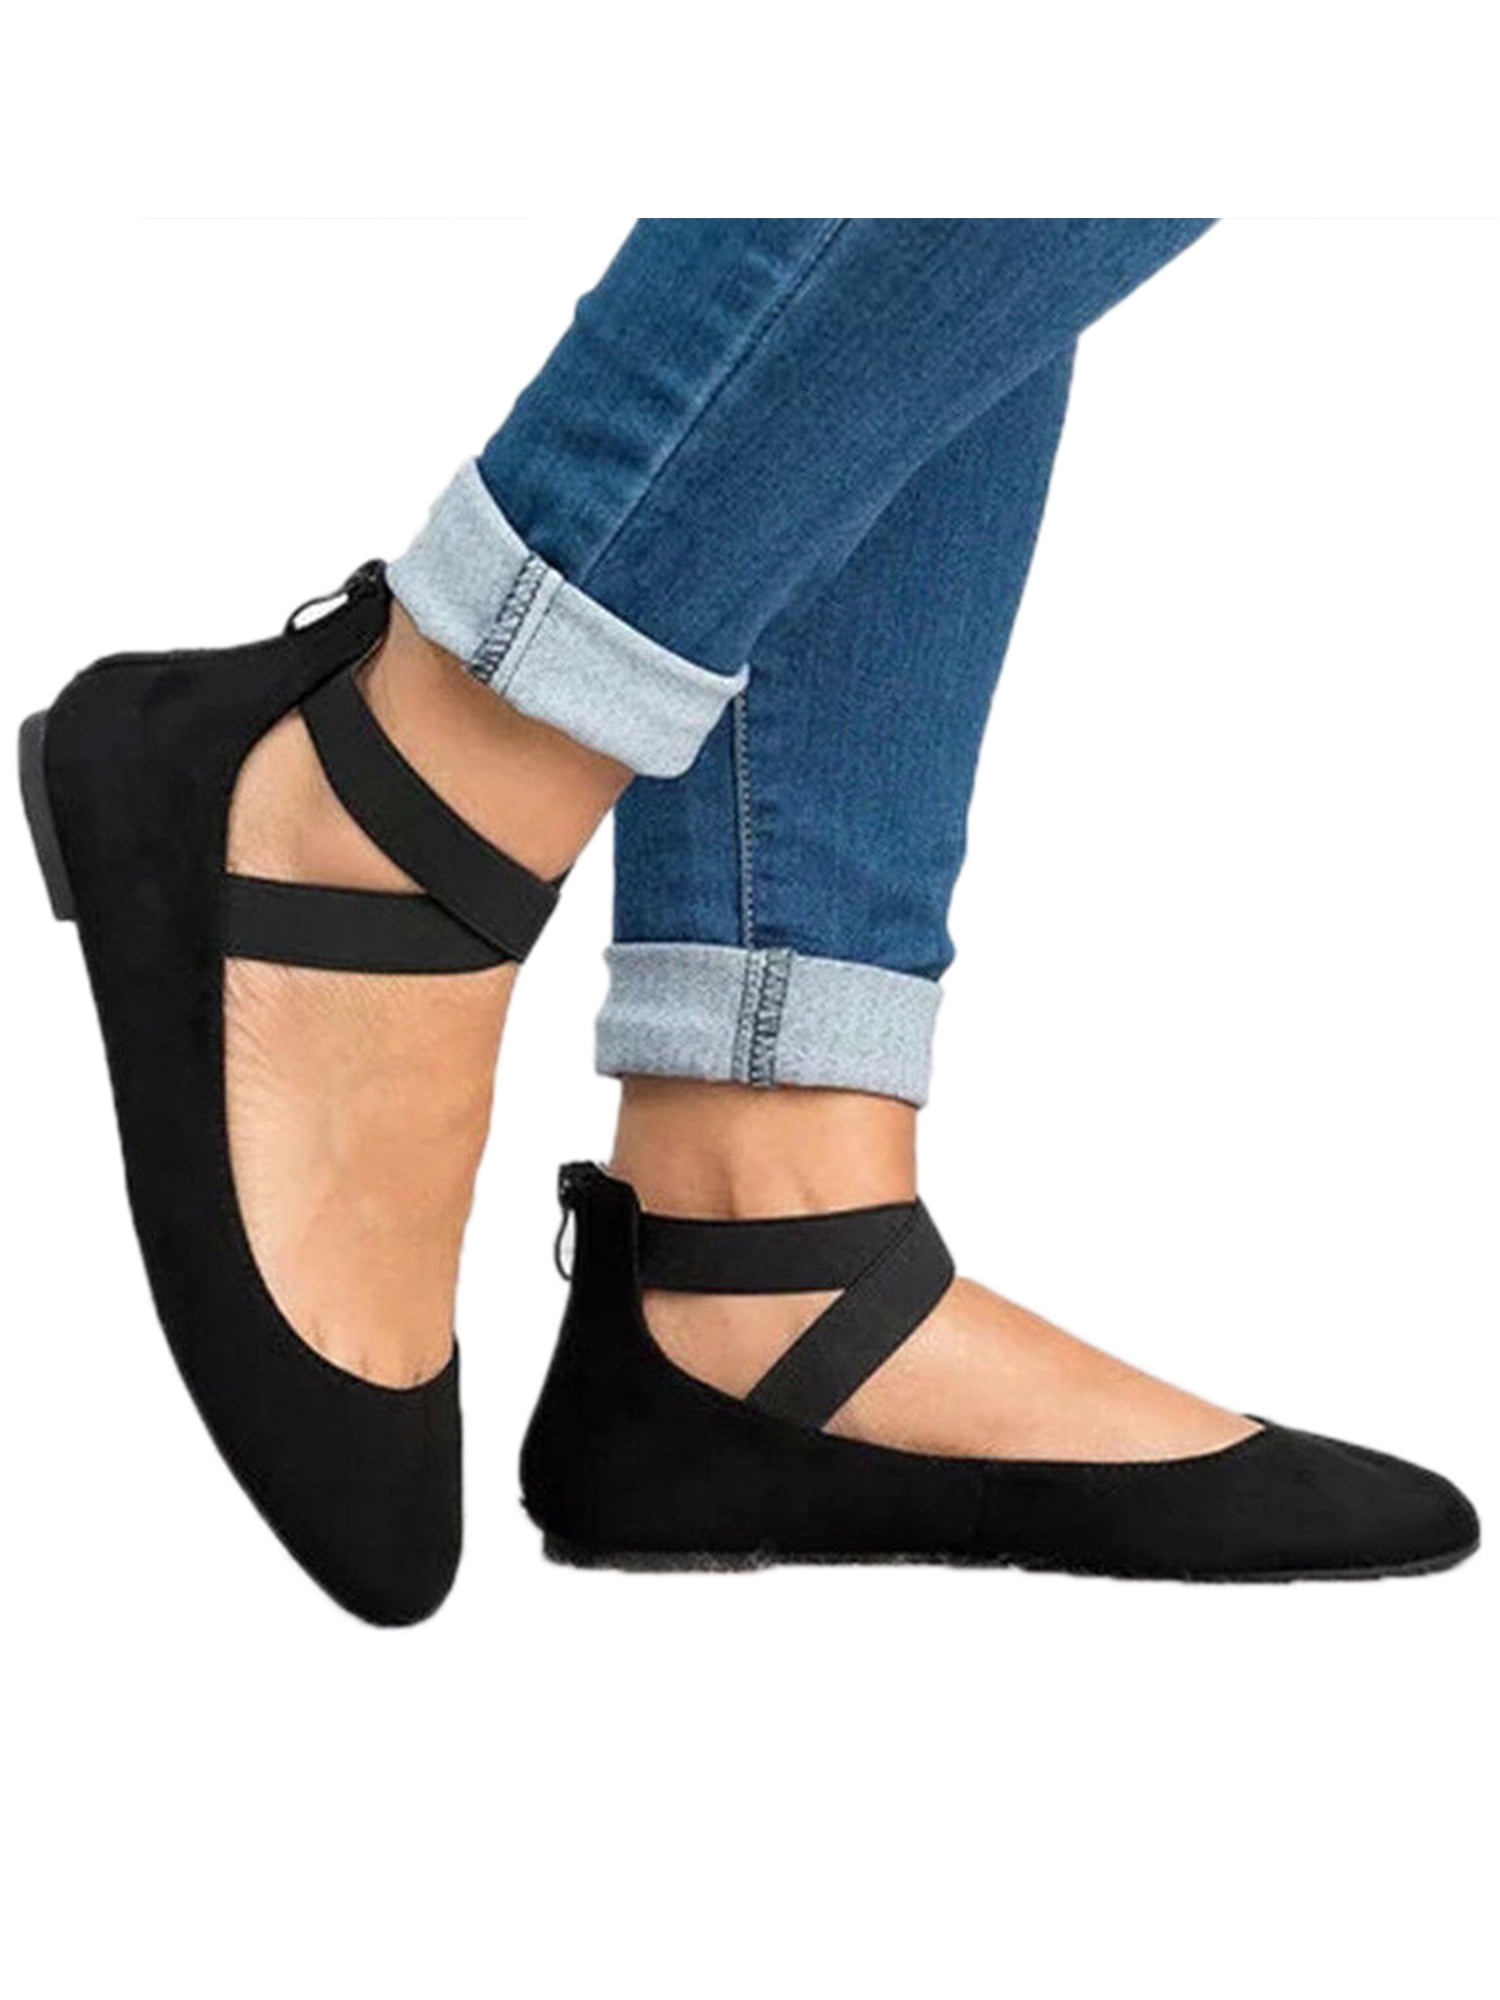 Women's Classic Ankle Strap Ballerina Flats Comfy Pointed Toe Casual Comfort Flat Shoes - Walmart.com